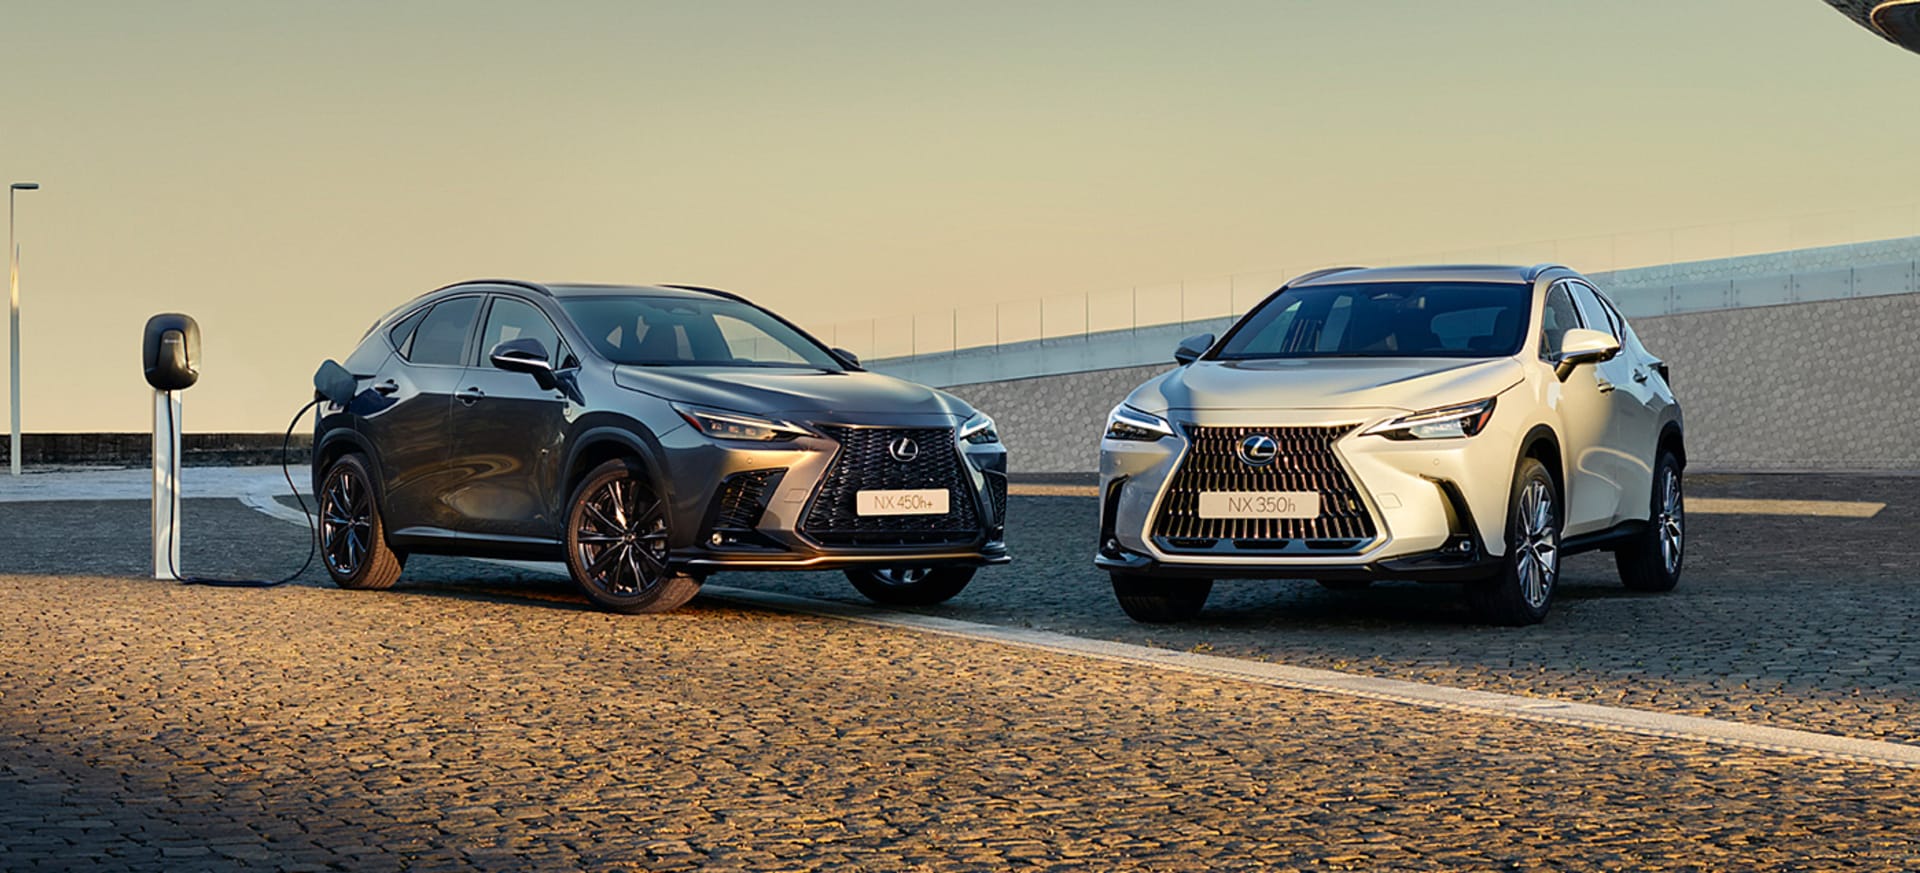 The new NX, the nimble crossover from Lexus.